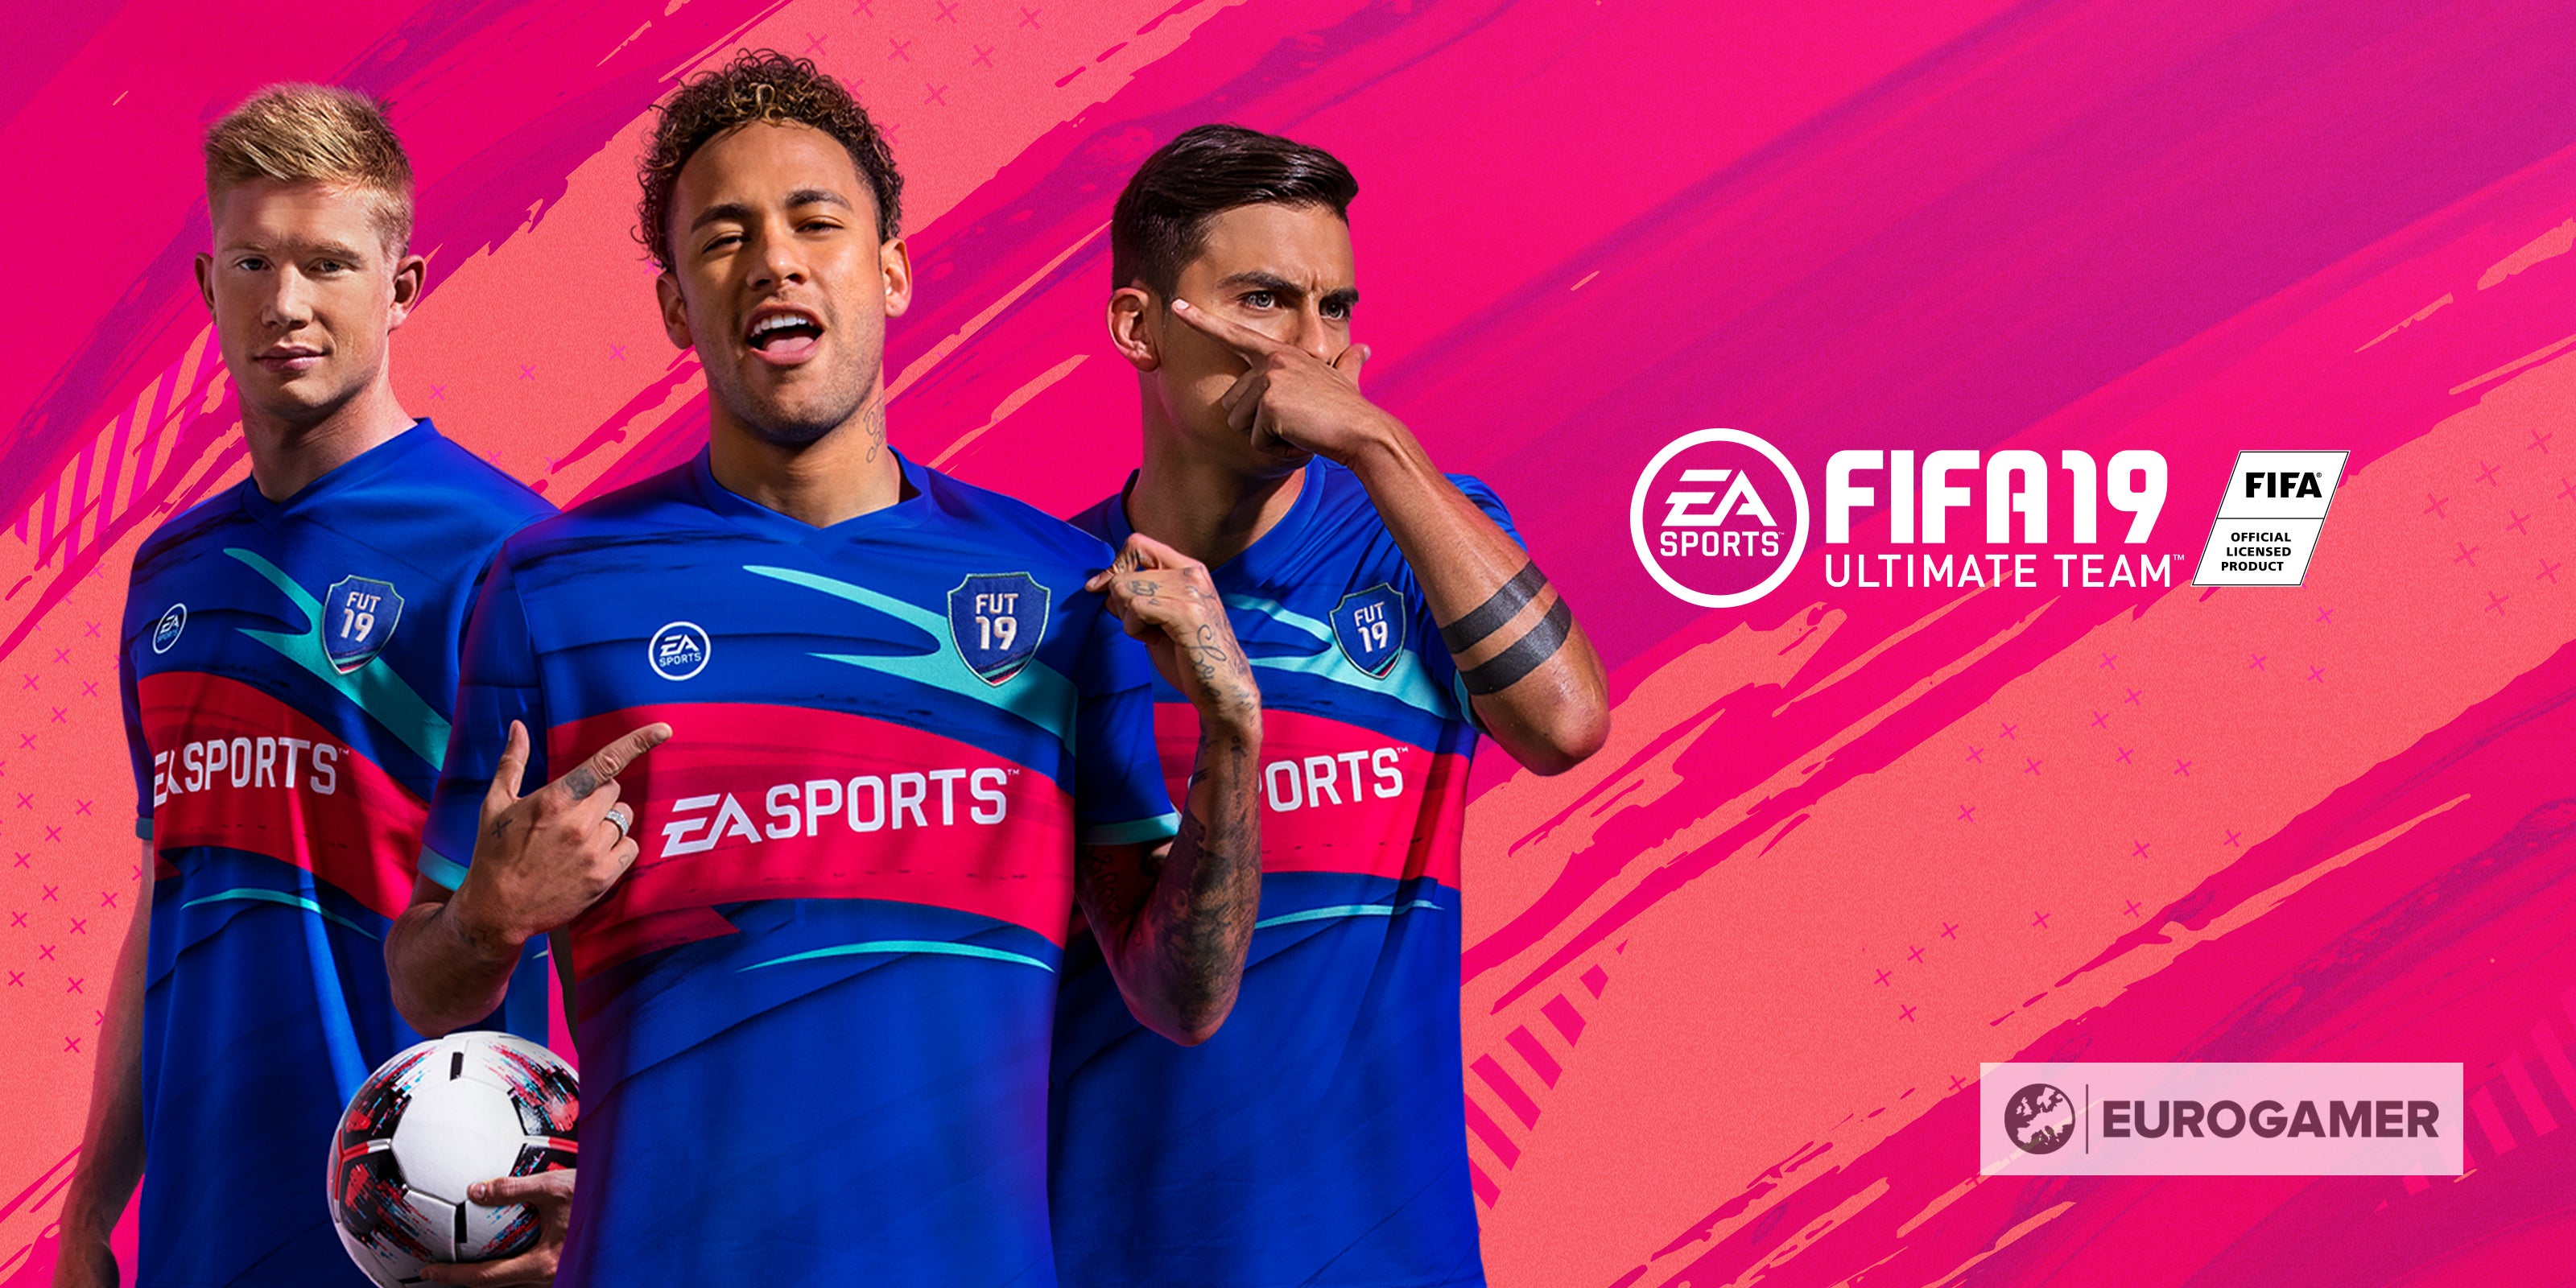 FIFA 19 tips, guide and new features explained | Eurogamer.net